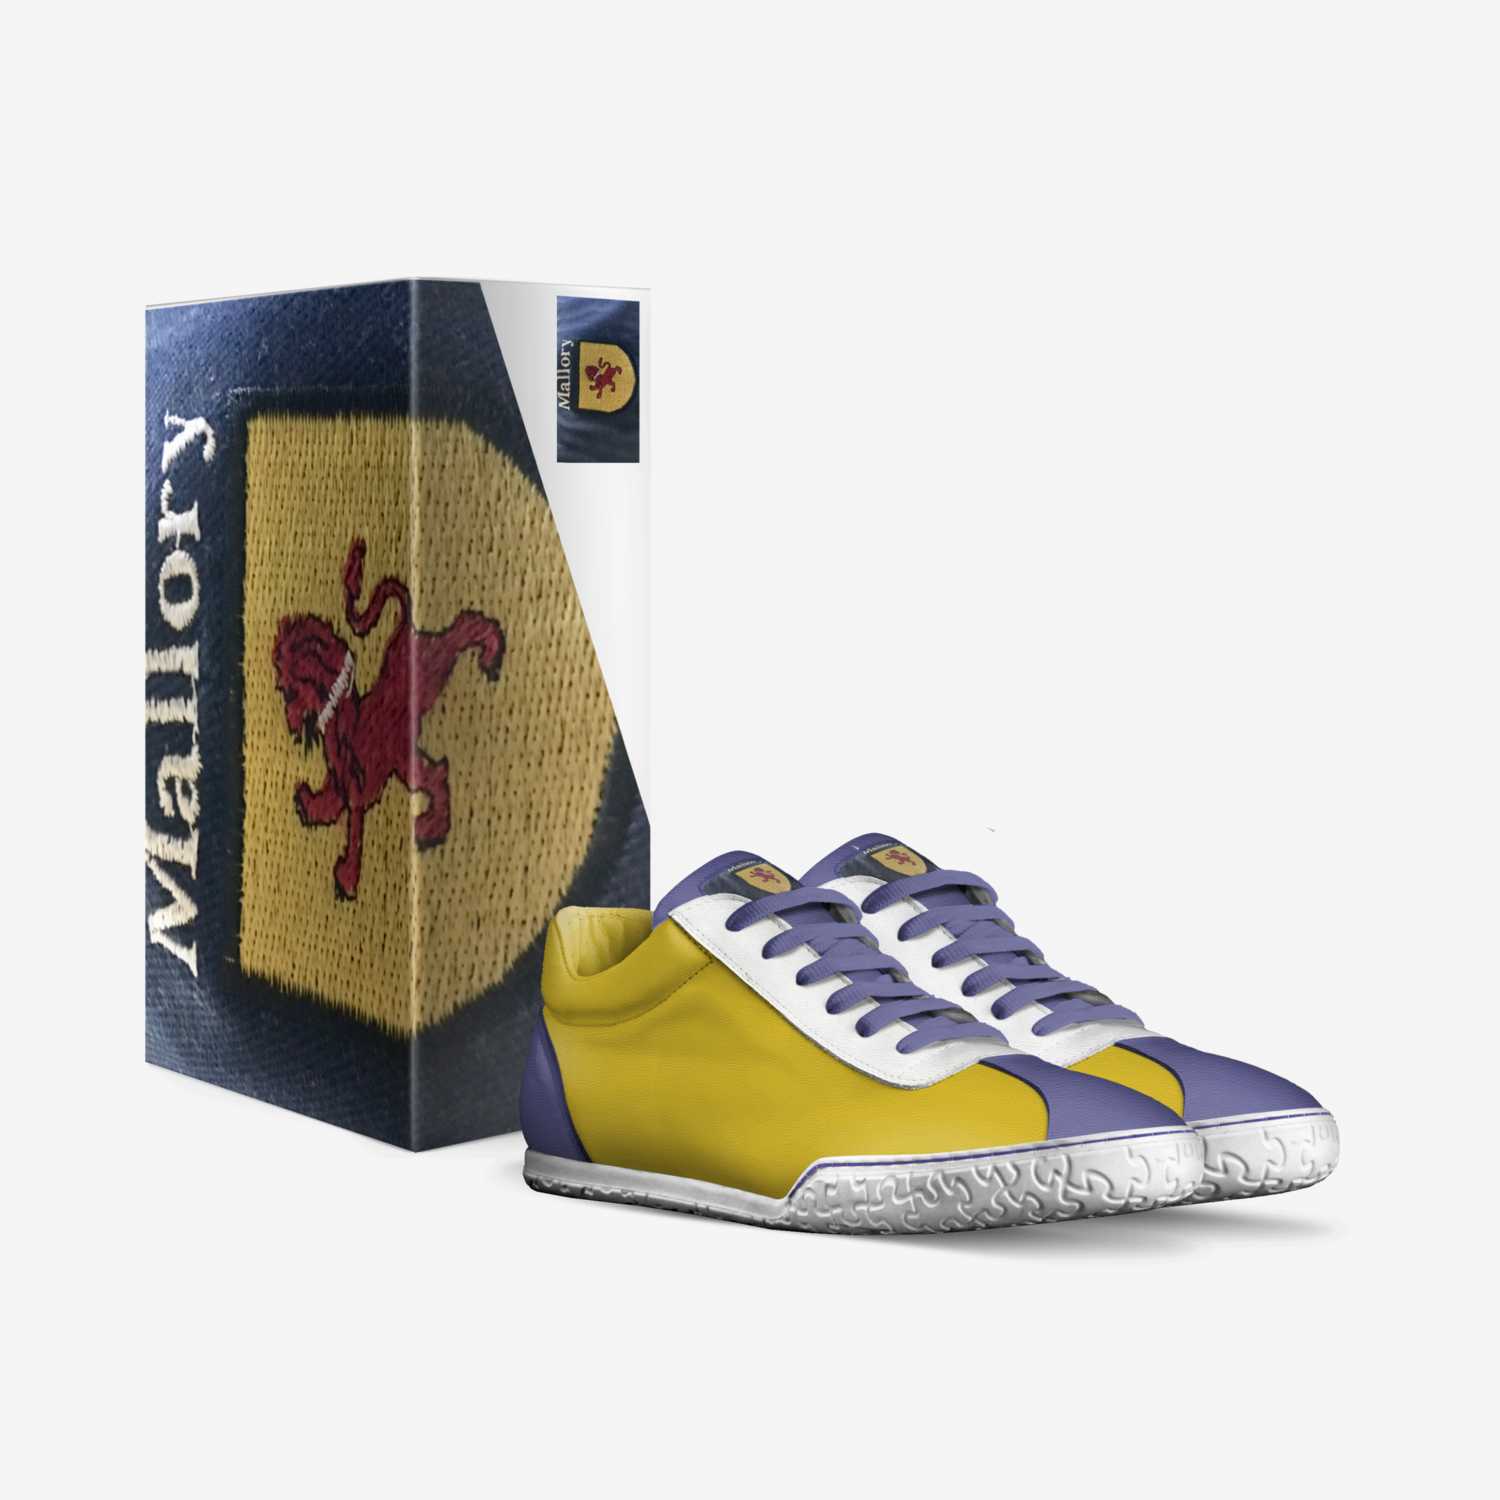 Mallory II custom made in Italy shoes by Art Mallory | Box view